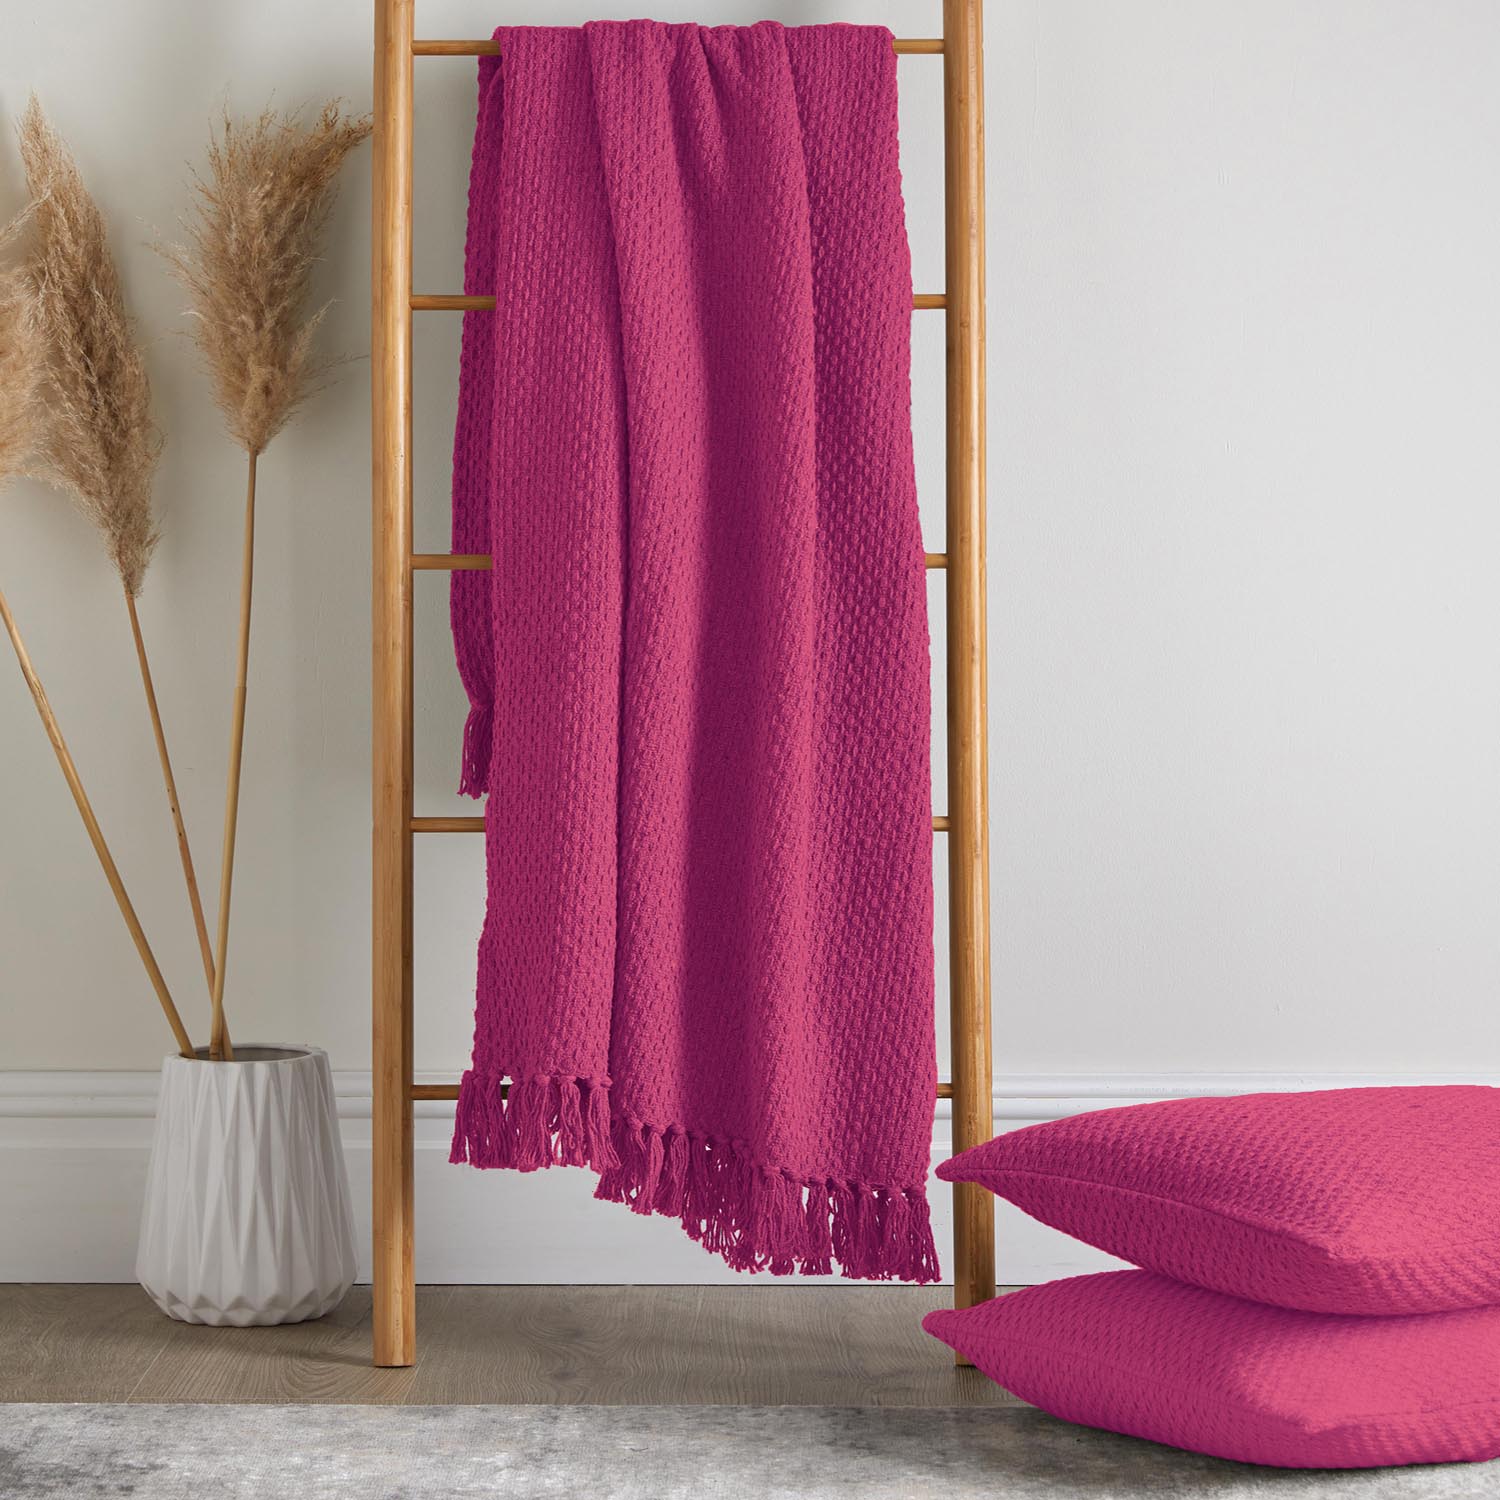 The Home Collection Hanson Pink Throw 200 X 200 2 Shaws Department Stores